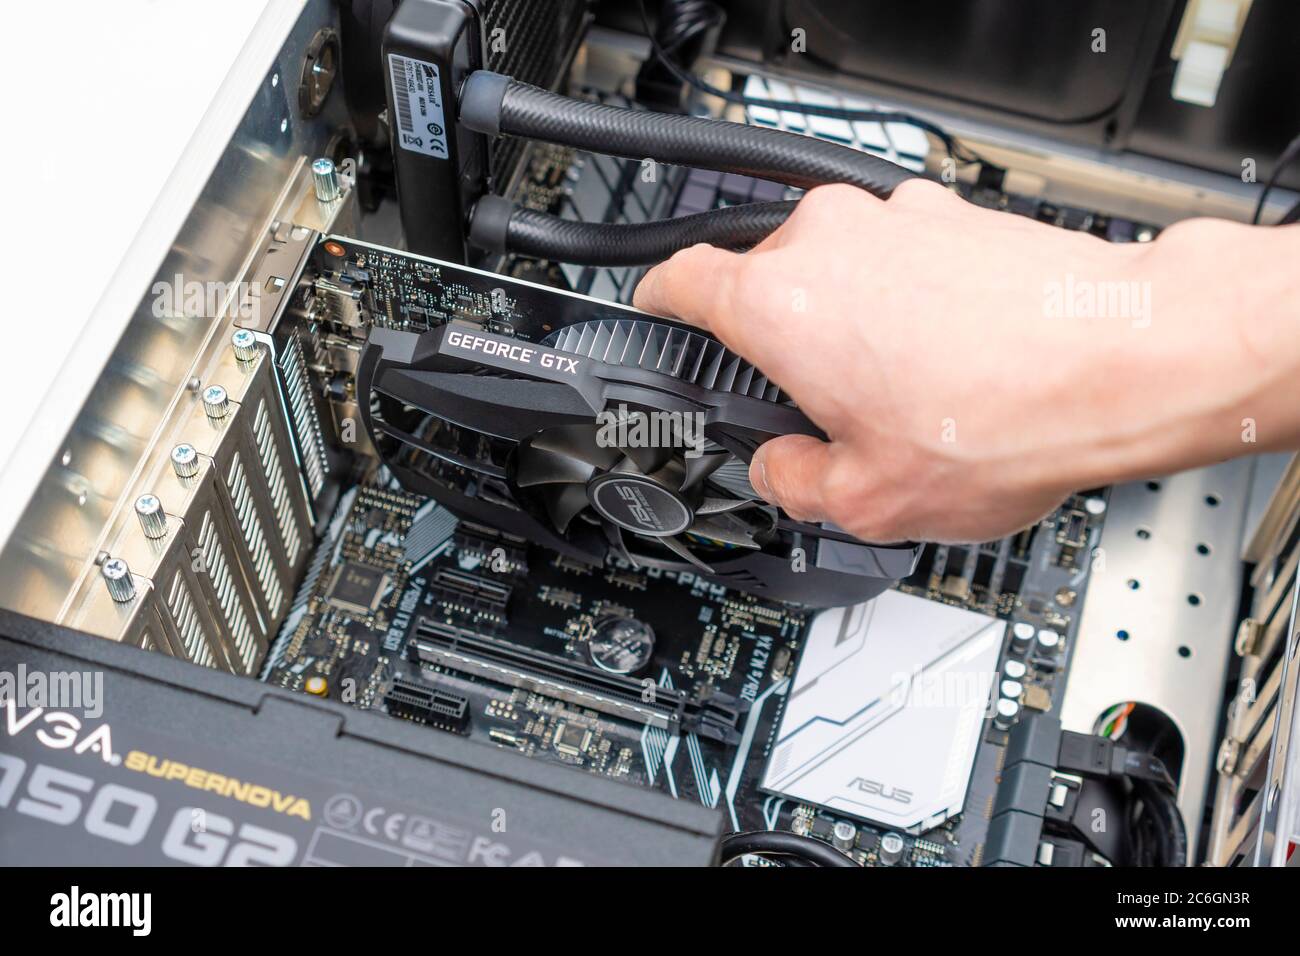 Installing graphic card in a computer Stock Photo